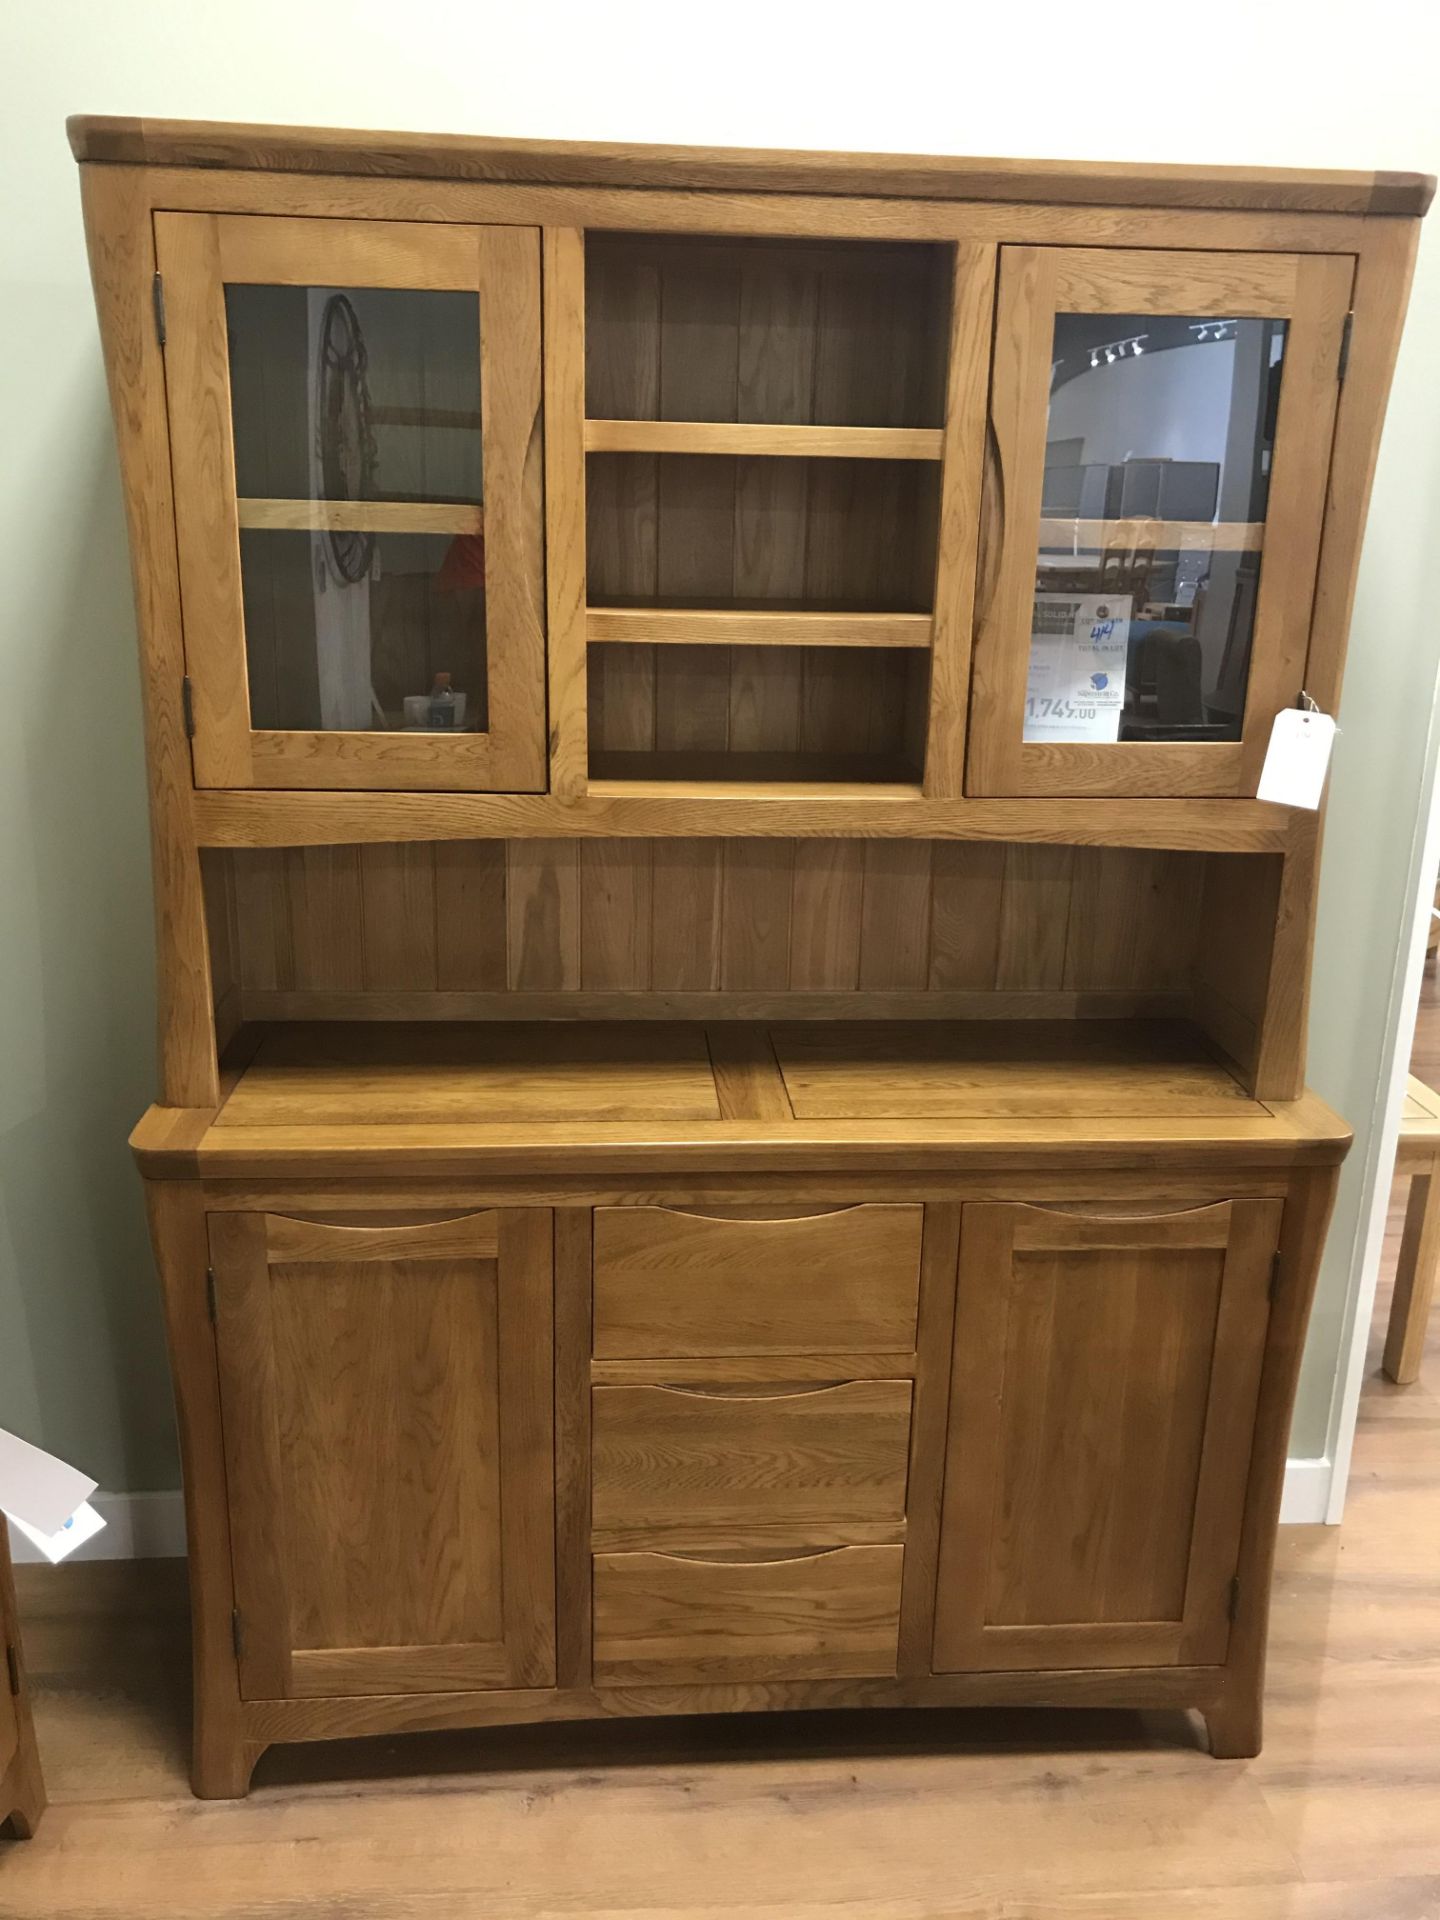 (Large Hutch Orrick) See Picture For Dimensions and Product Info